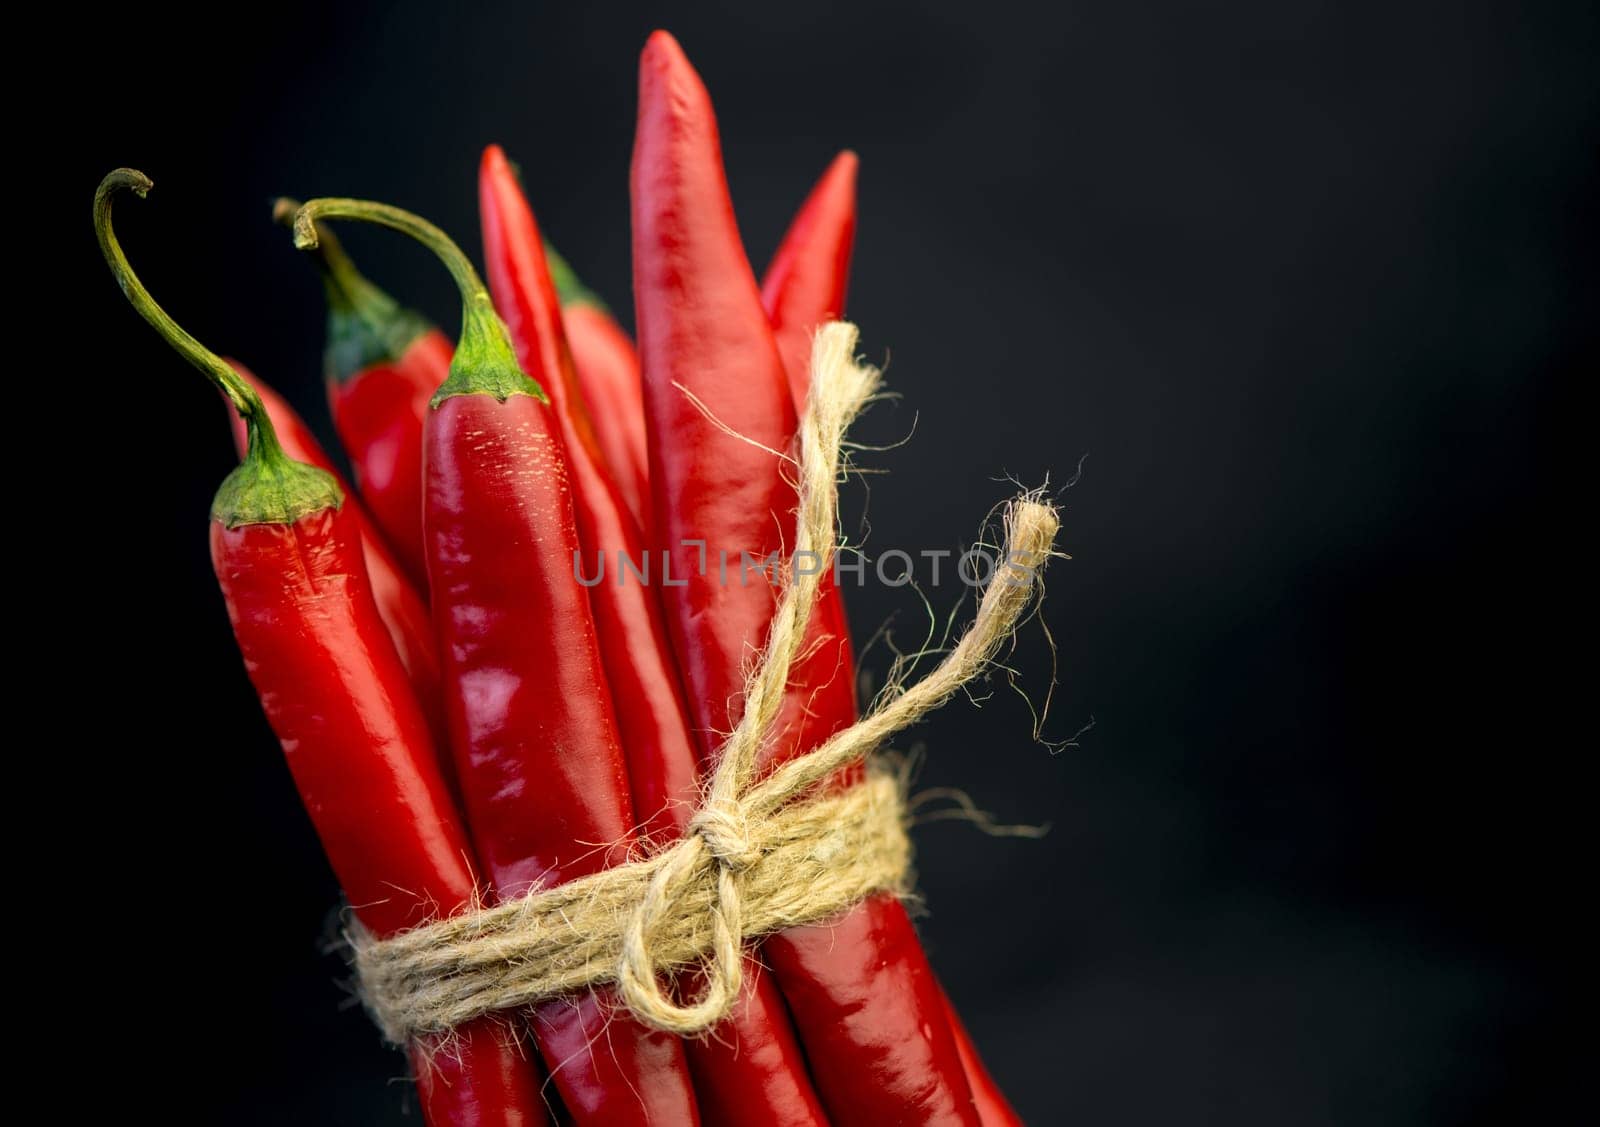 Chili pepper isolated on a black background. Knitted hot chili pepper tied with a rope. Chili hot pepper clipping path by aprilphoto